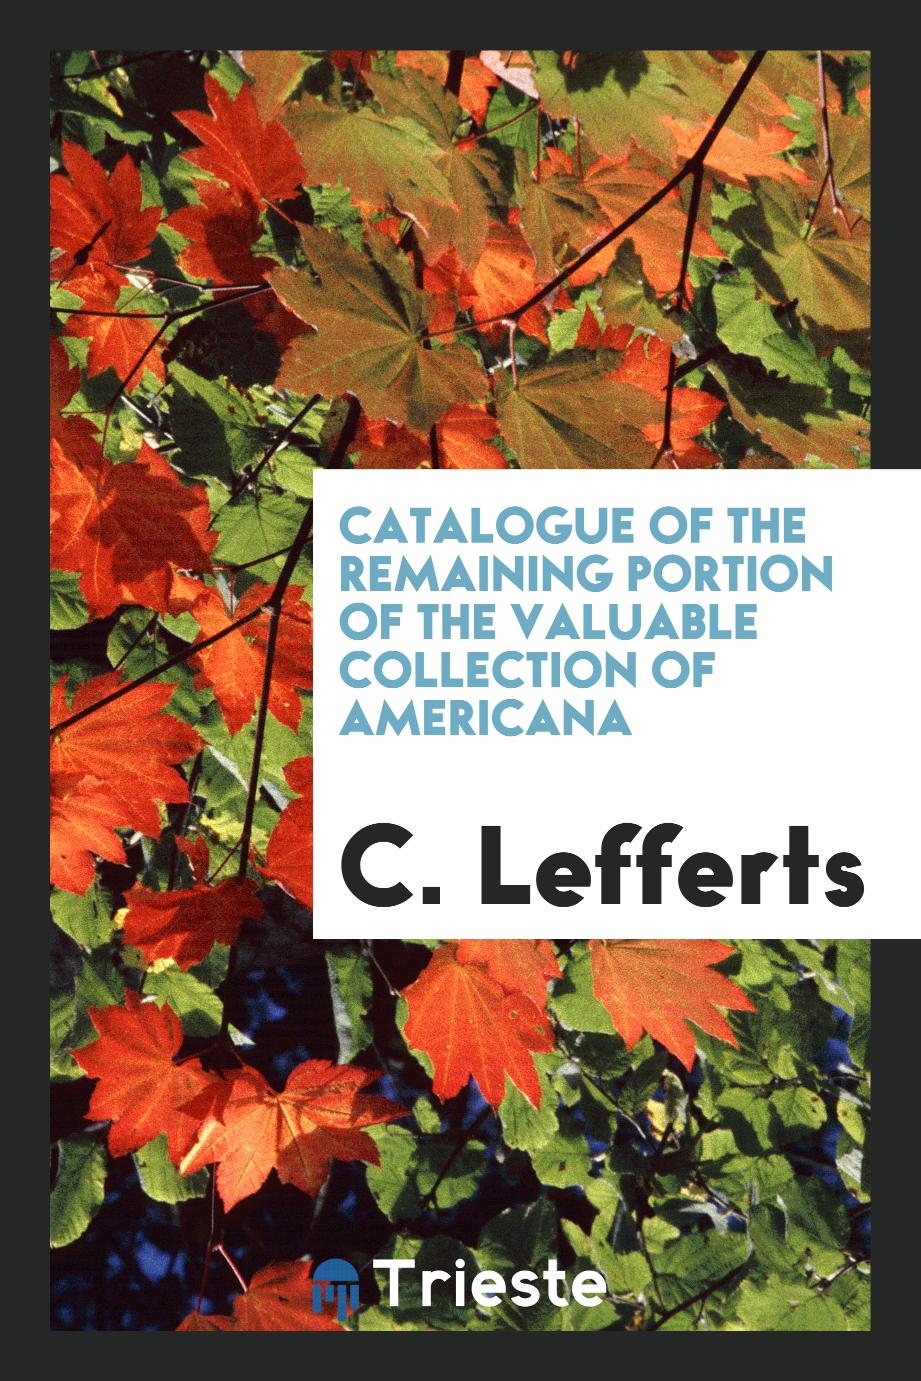 Catalogue of the remaining portion of the valuable collection of Americana